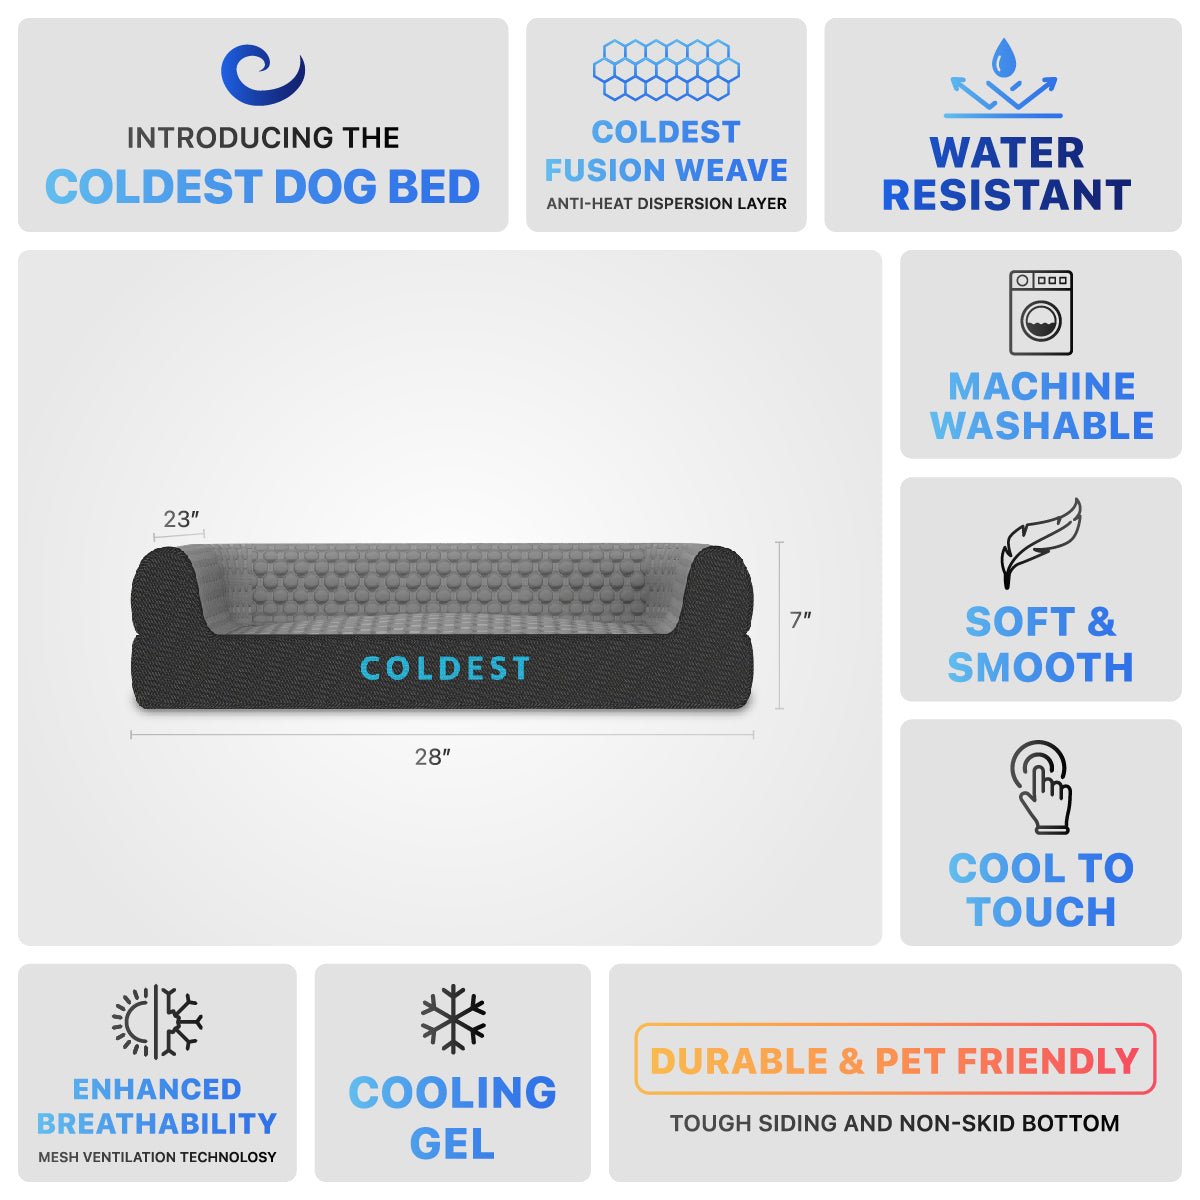 The Coldest Cozy Dog Bed